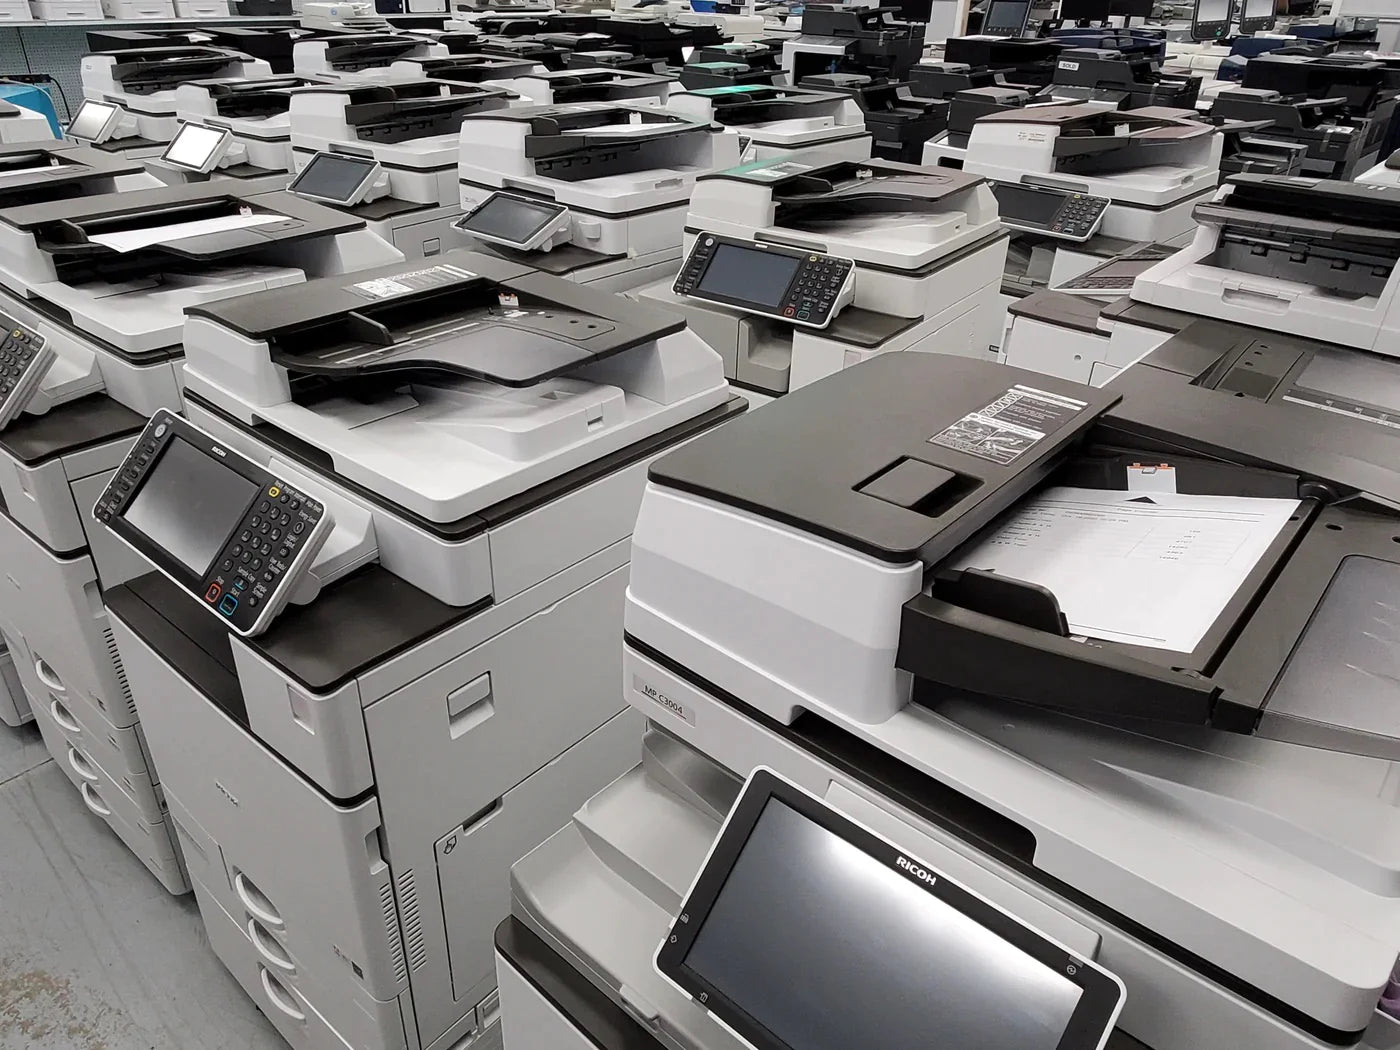 Which Type of Printer Can Be Very Cost Effective for a Small Business?